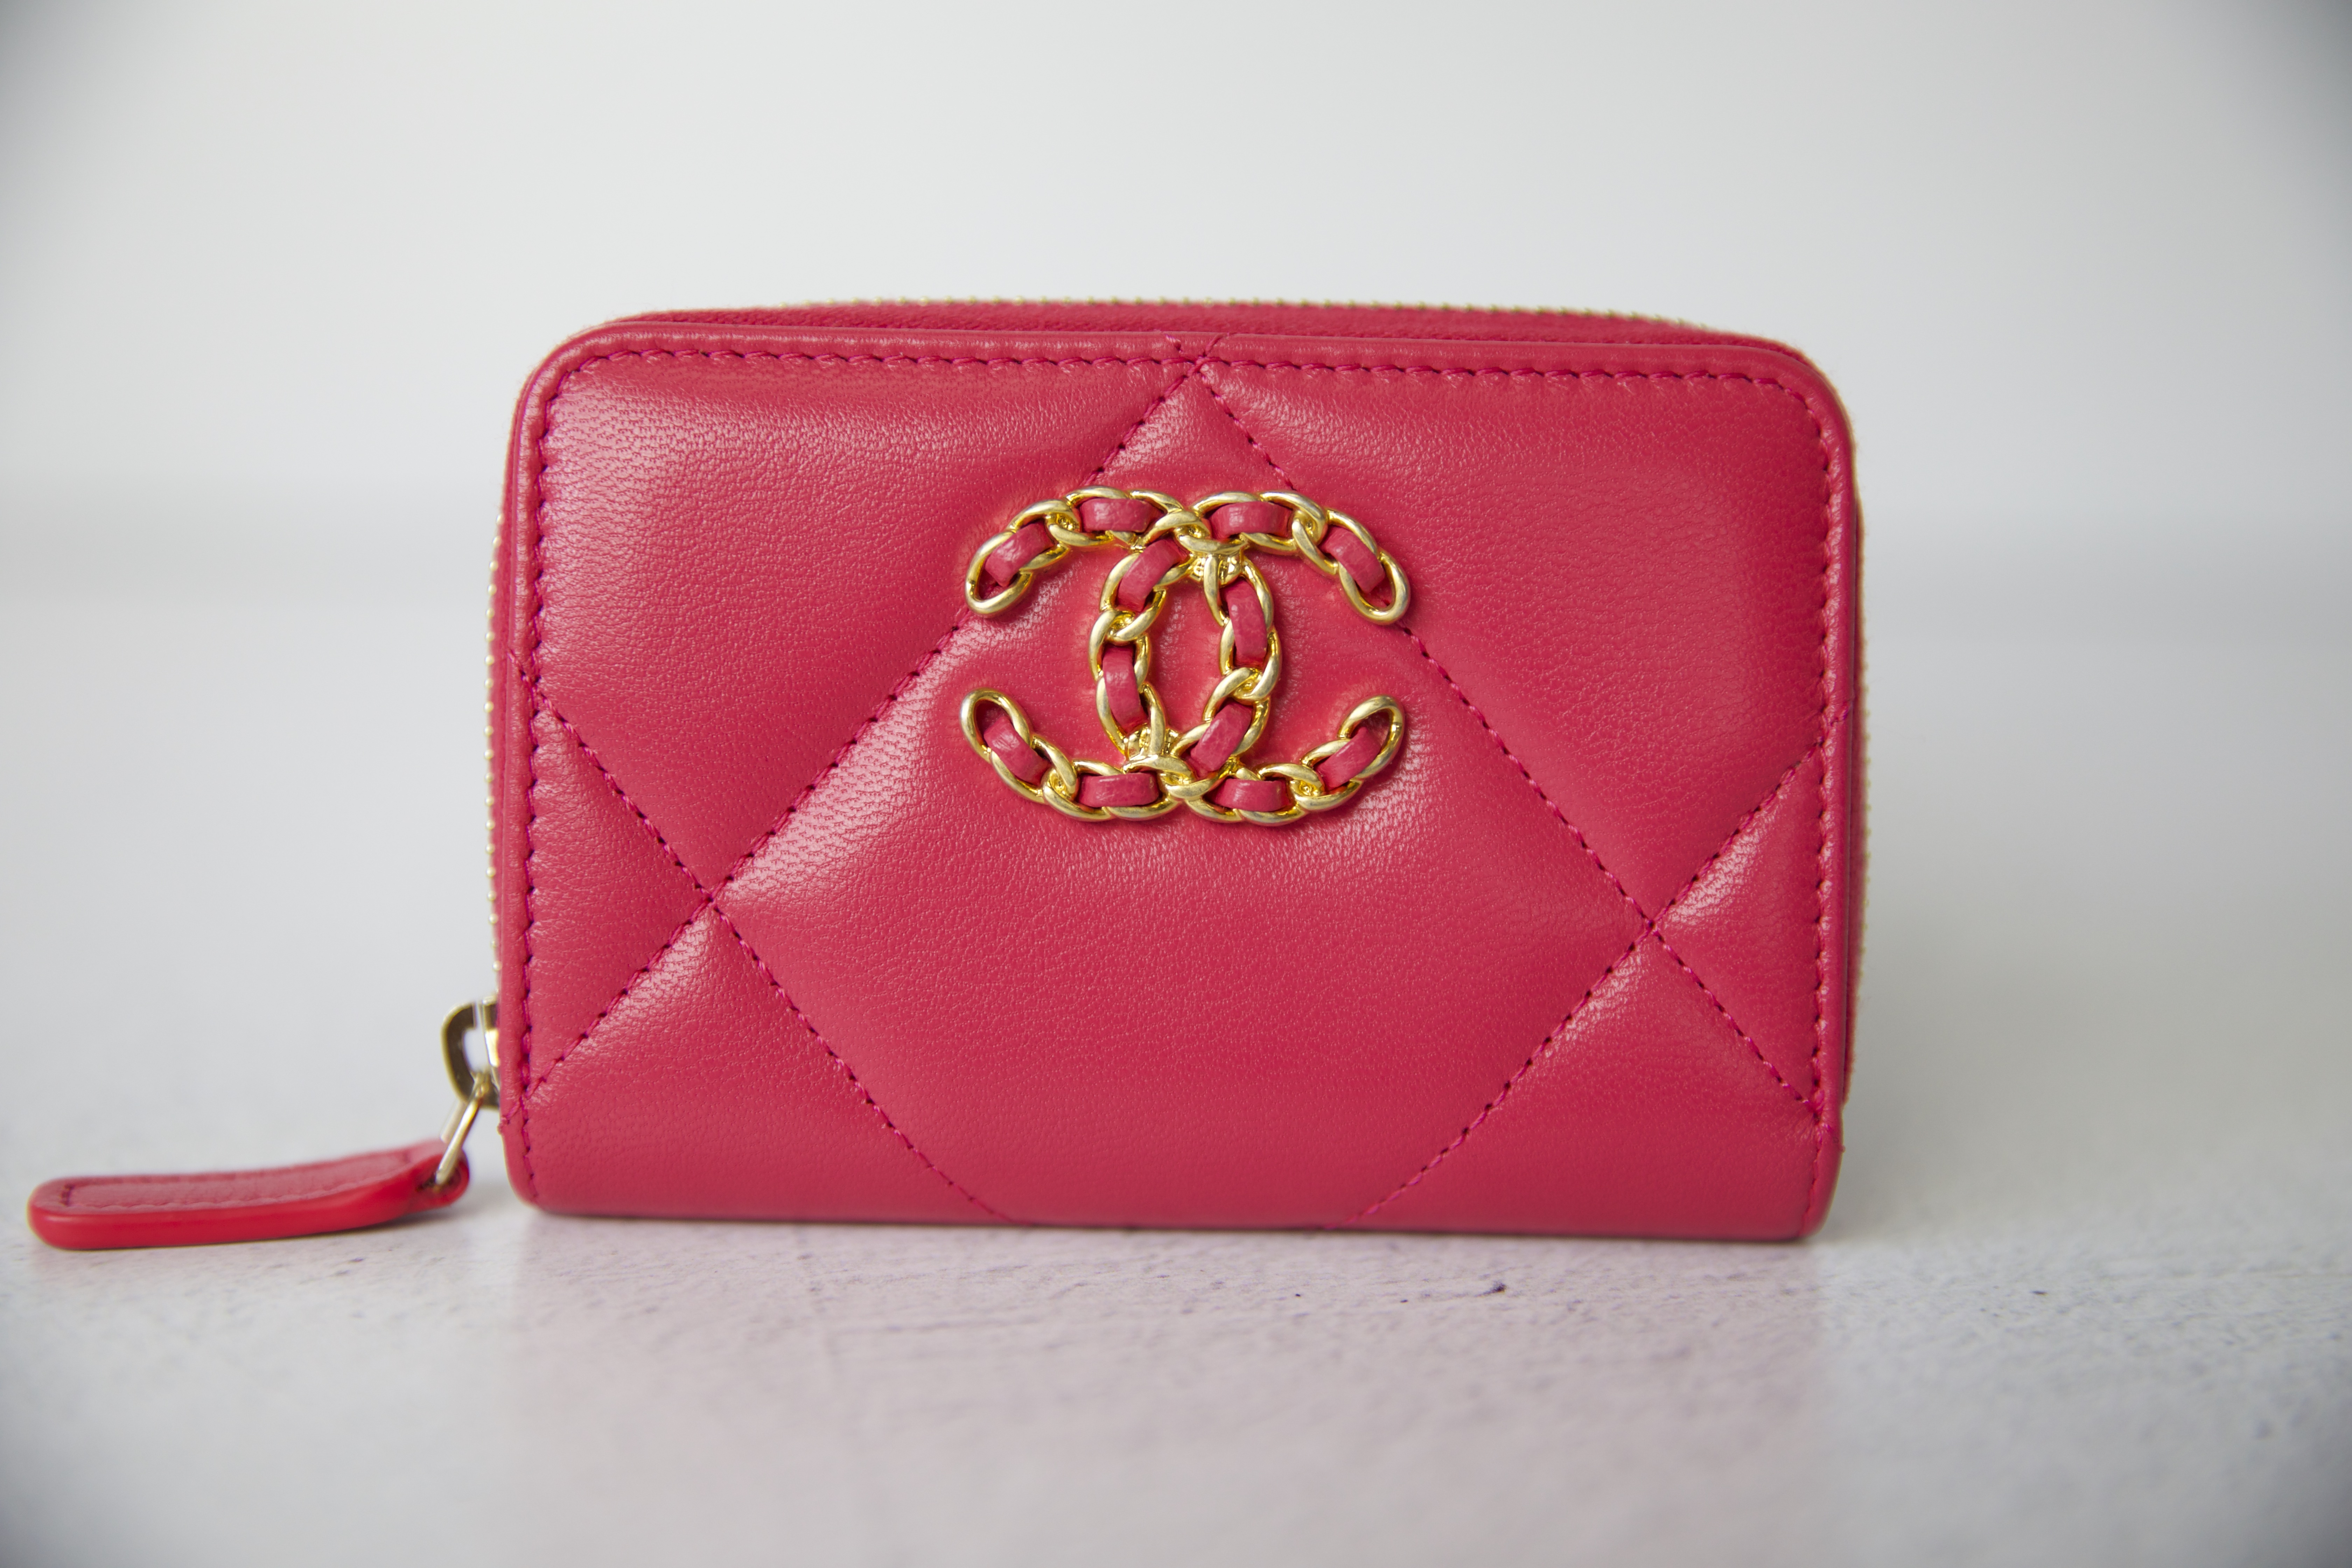 Chanel 19 Zip Around Cardholder Wallet, Pink Lambskin, Preowned in